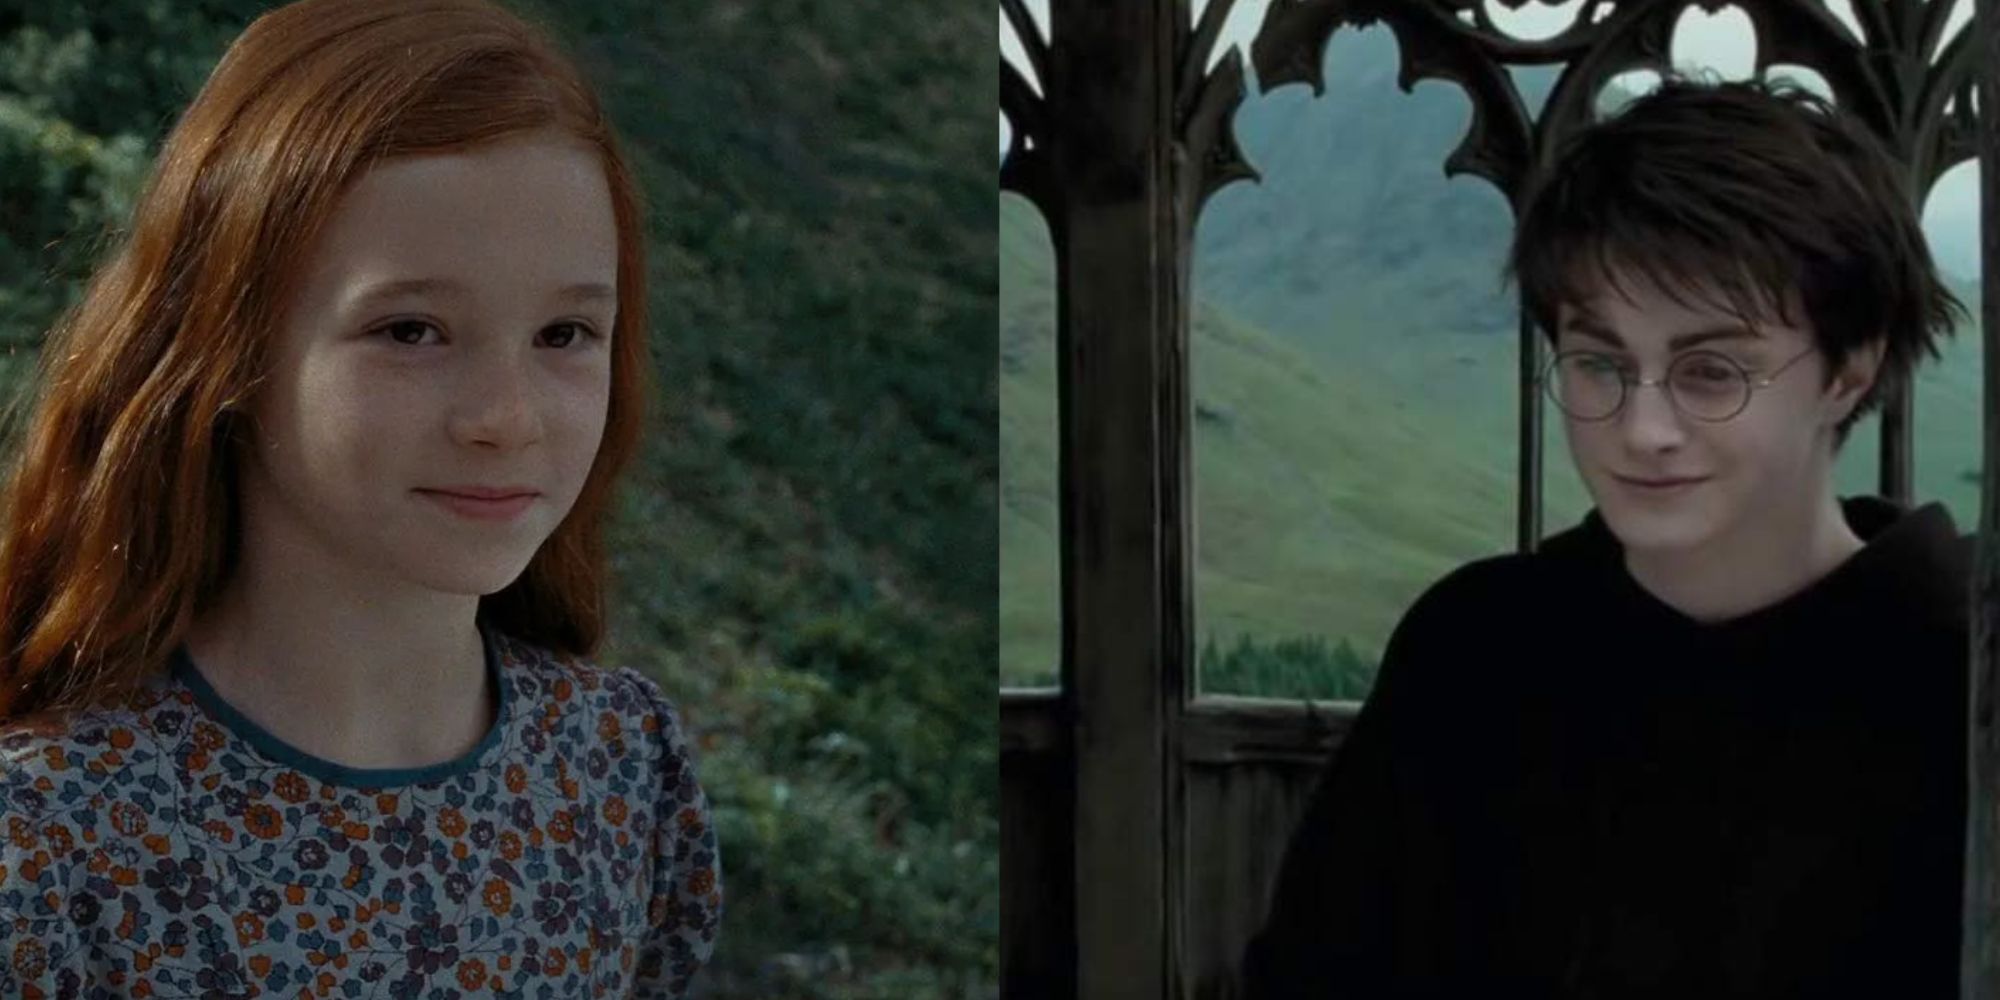 Split images of Lily Potter smiling in Deathly Hallows and Harry Potter smiling in Prisoner of Azkaban